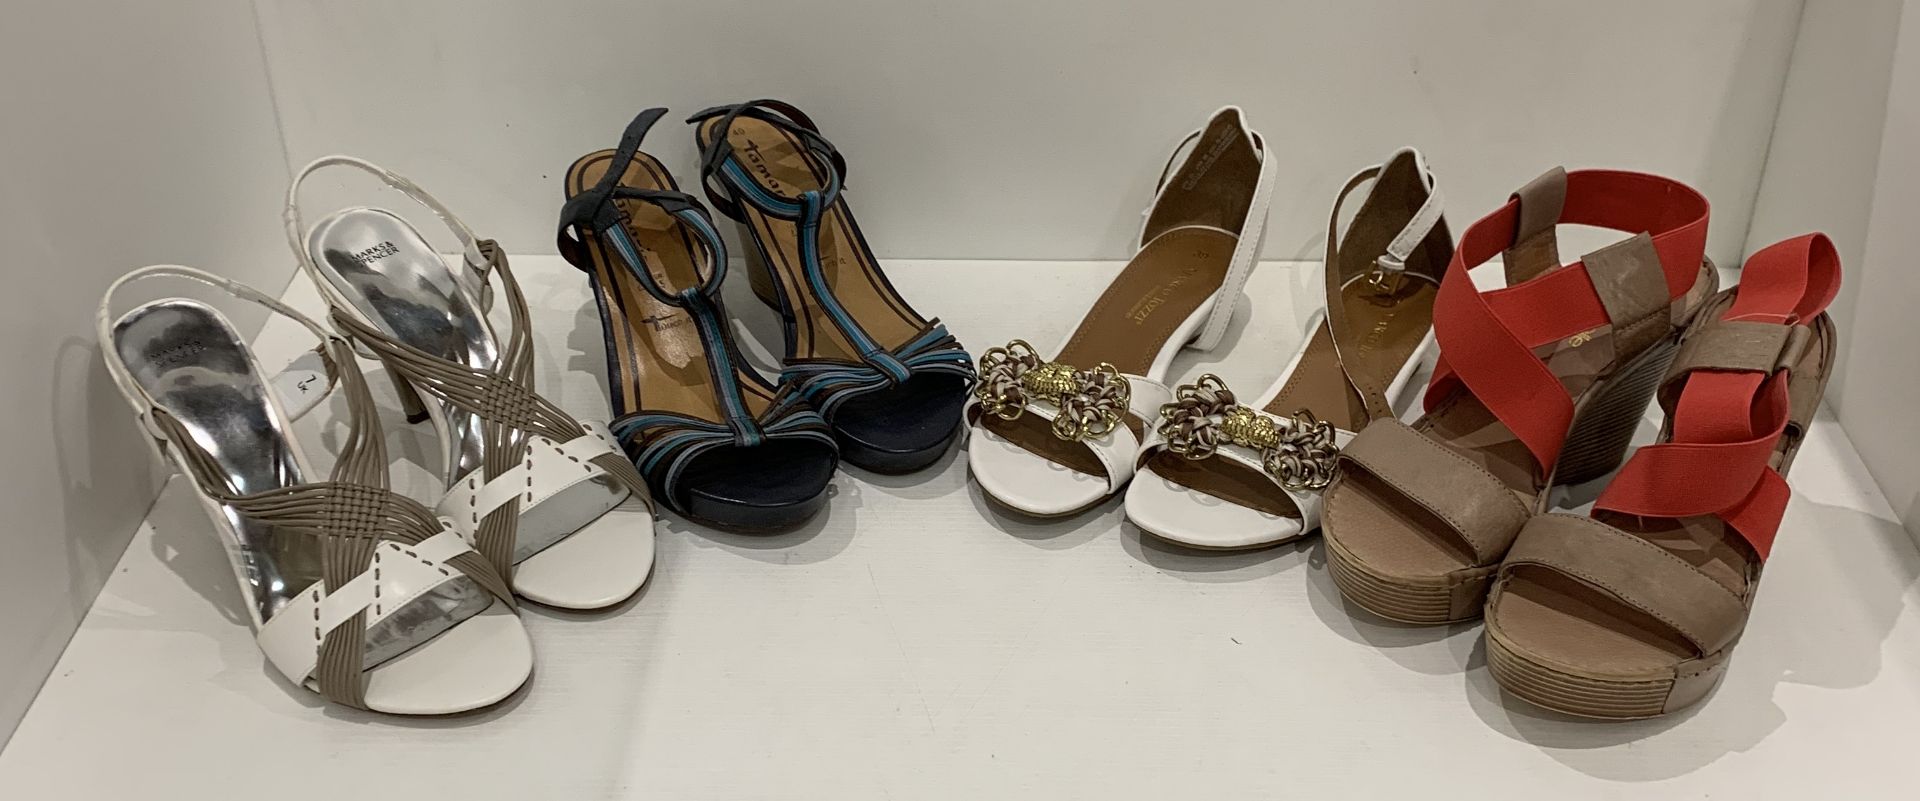 4 x pairs of ladies sandals by Mode in Pelle, Marco Tozzi,